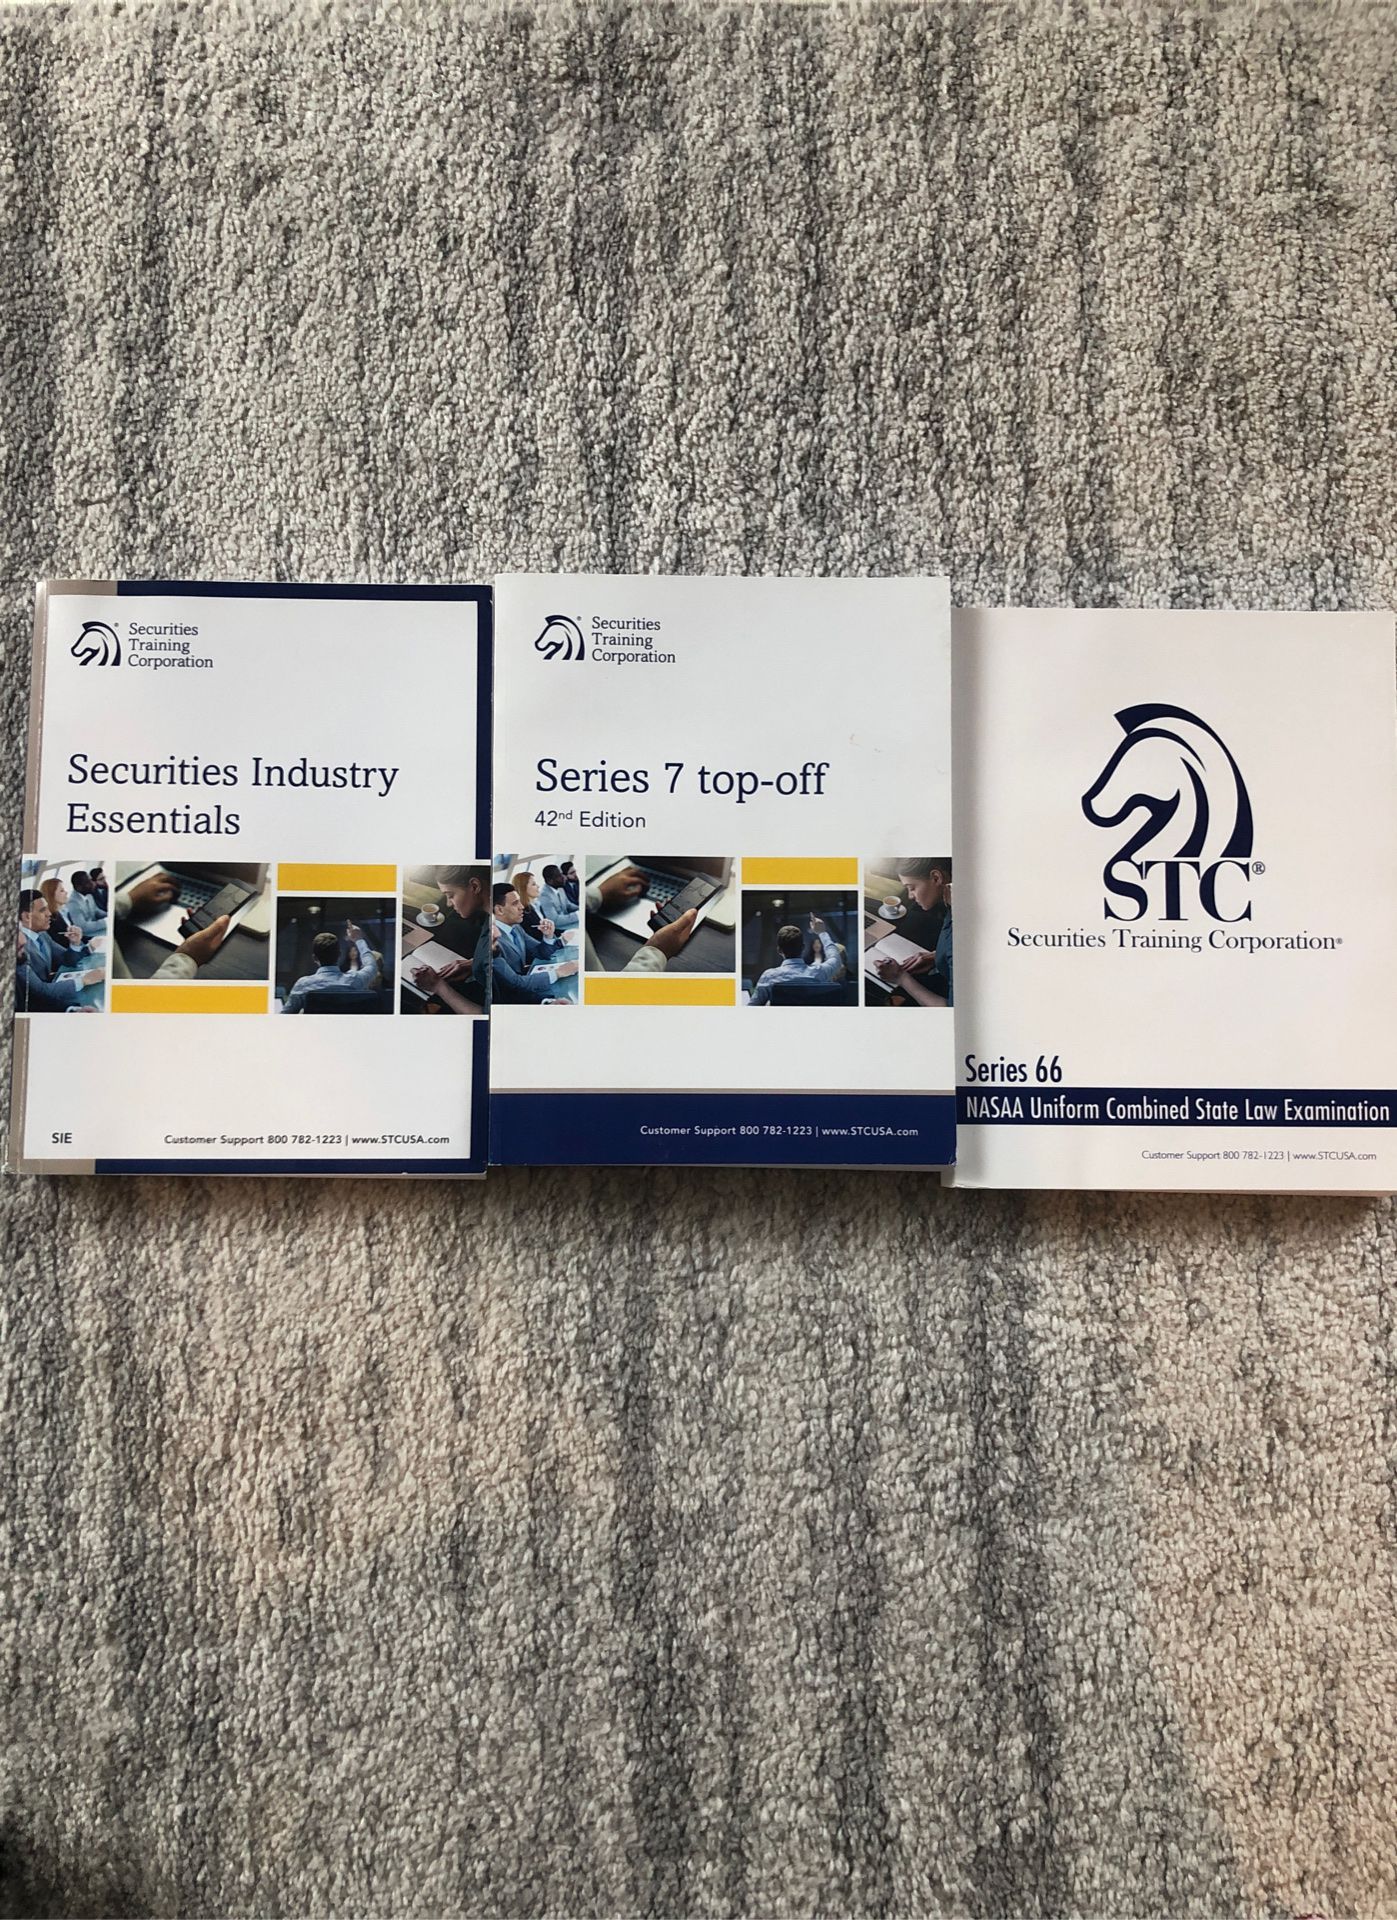 Series 7, SIE, and Series 66 Study Manuals